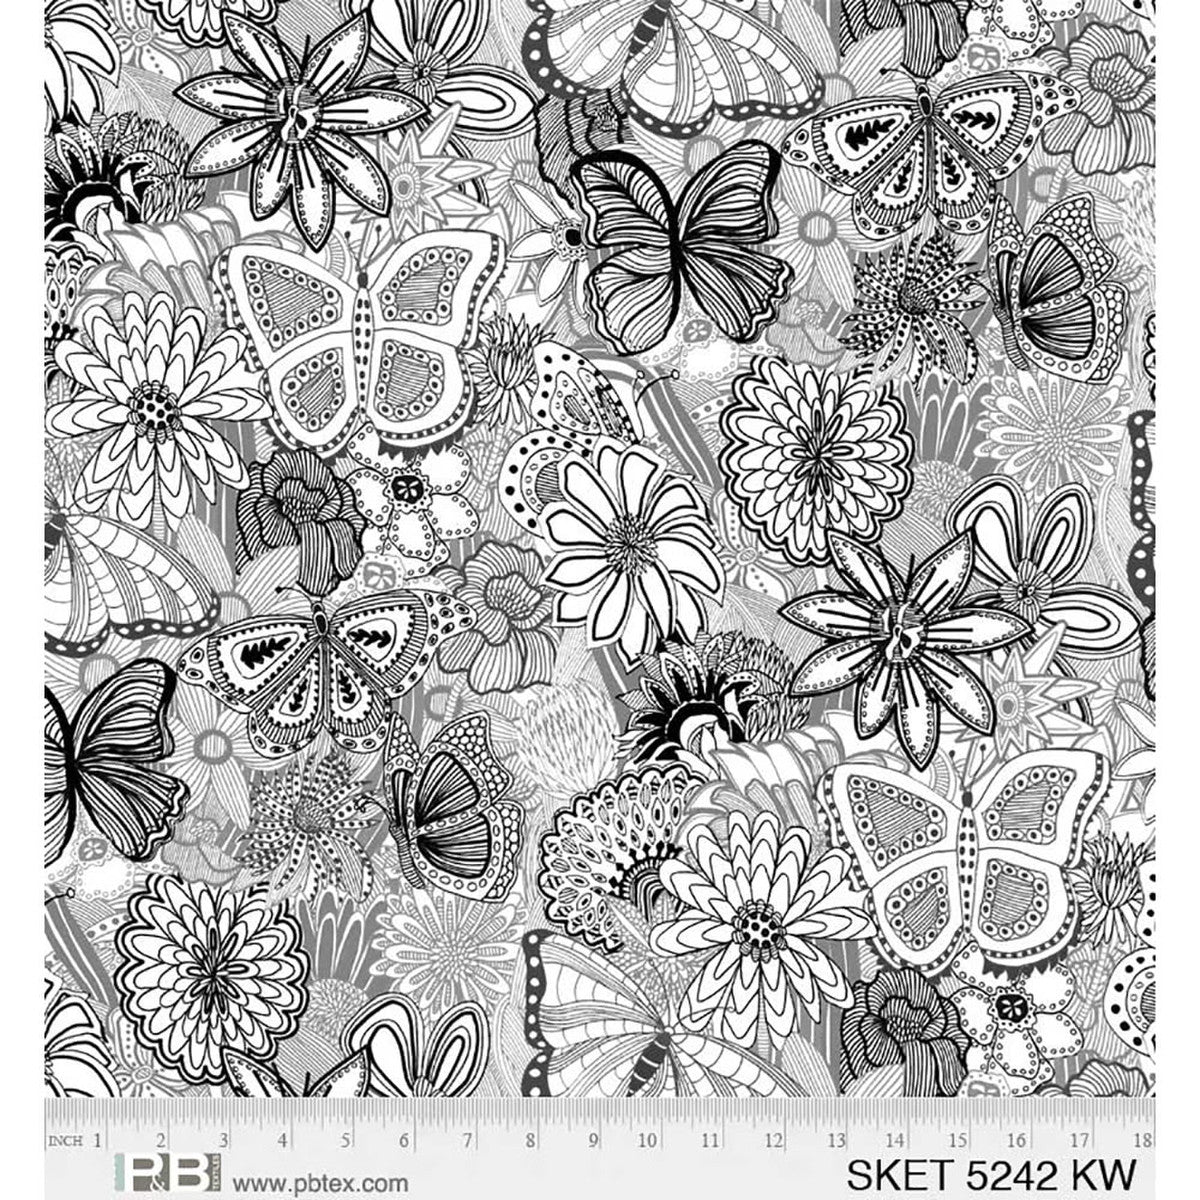 108 Inch Wide Sketchbook Butterfly Flower Garden Black and White Quilt Back Cotton Fabric Extra Wide